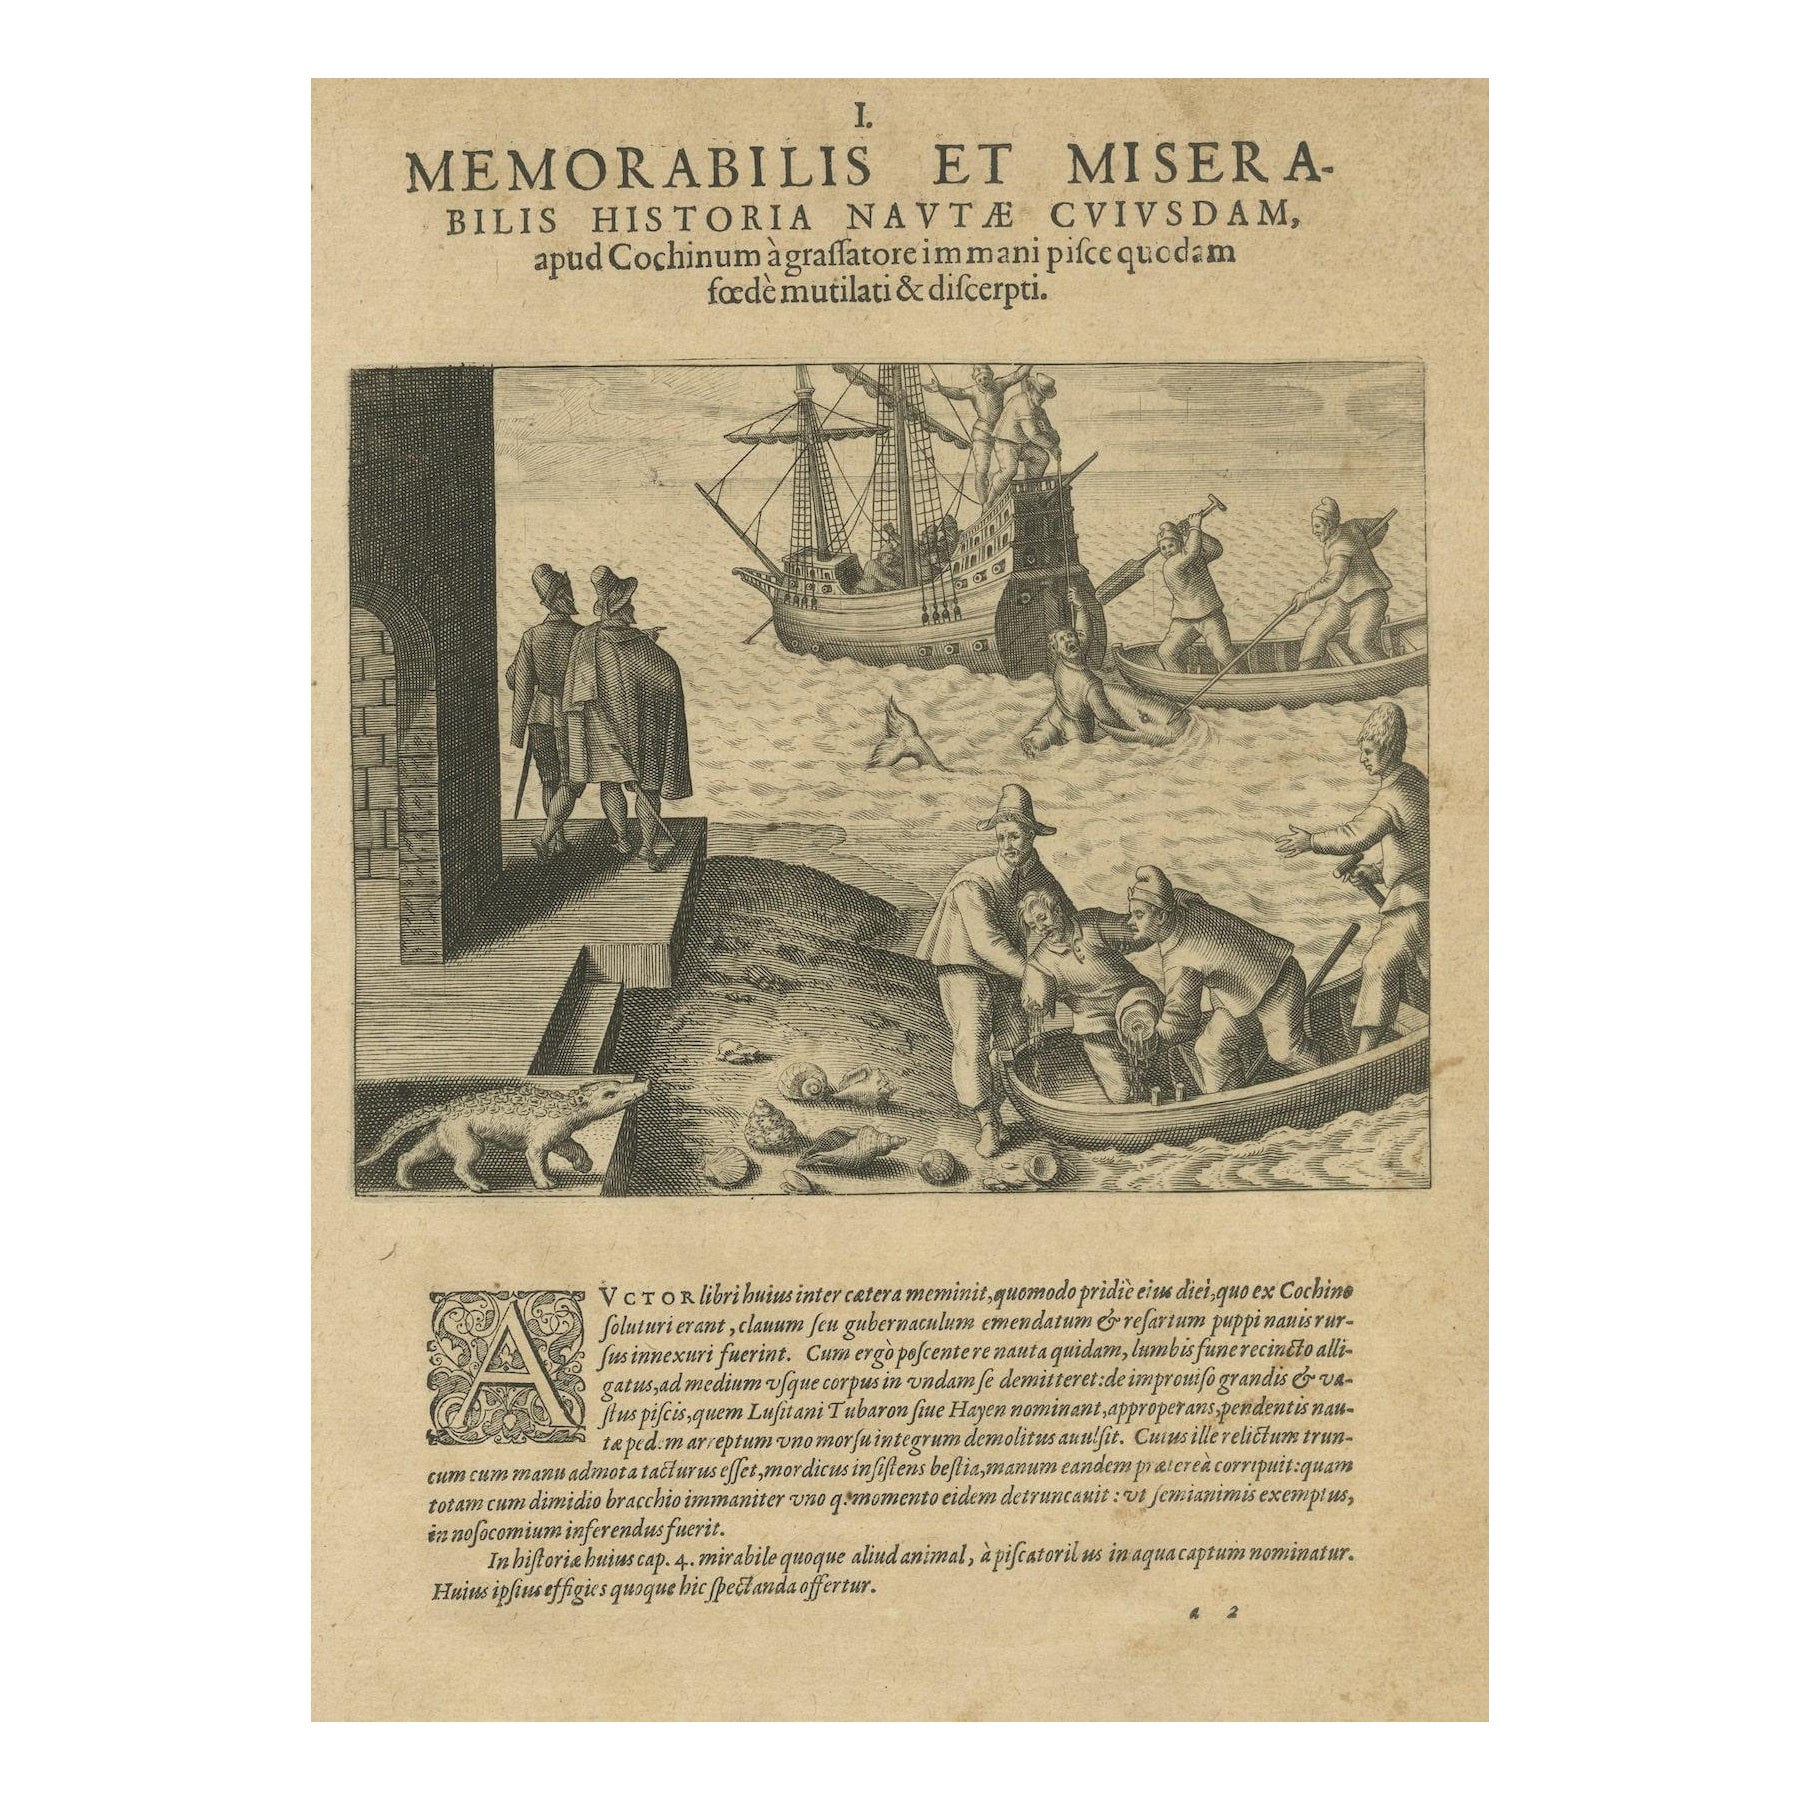 The de Bry Engraving of Maritime Marvels of Dutch Seafarers at Cochin, 1601 For Sale